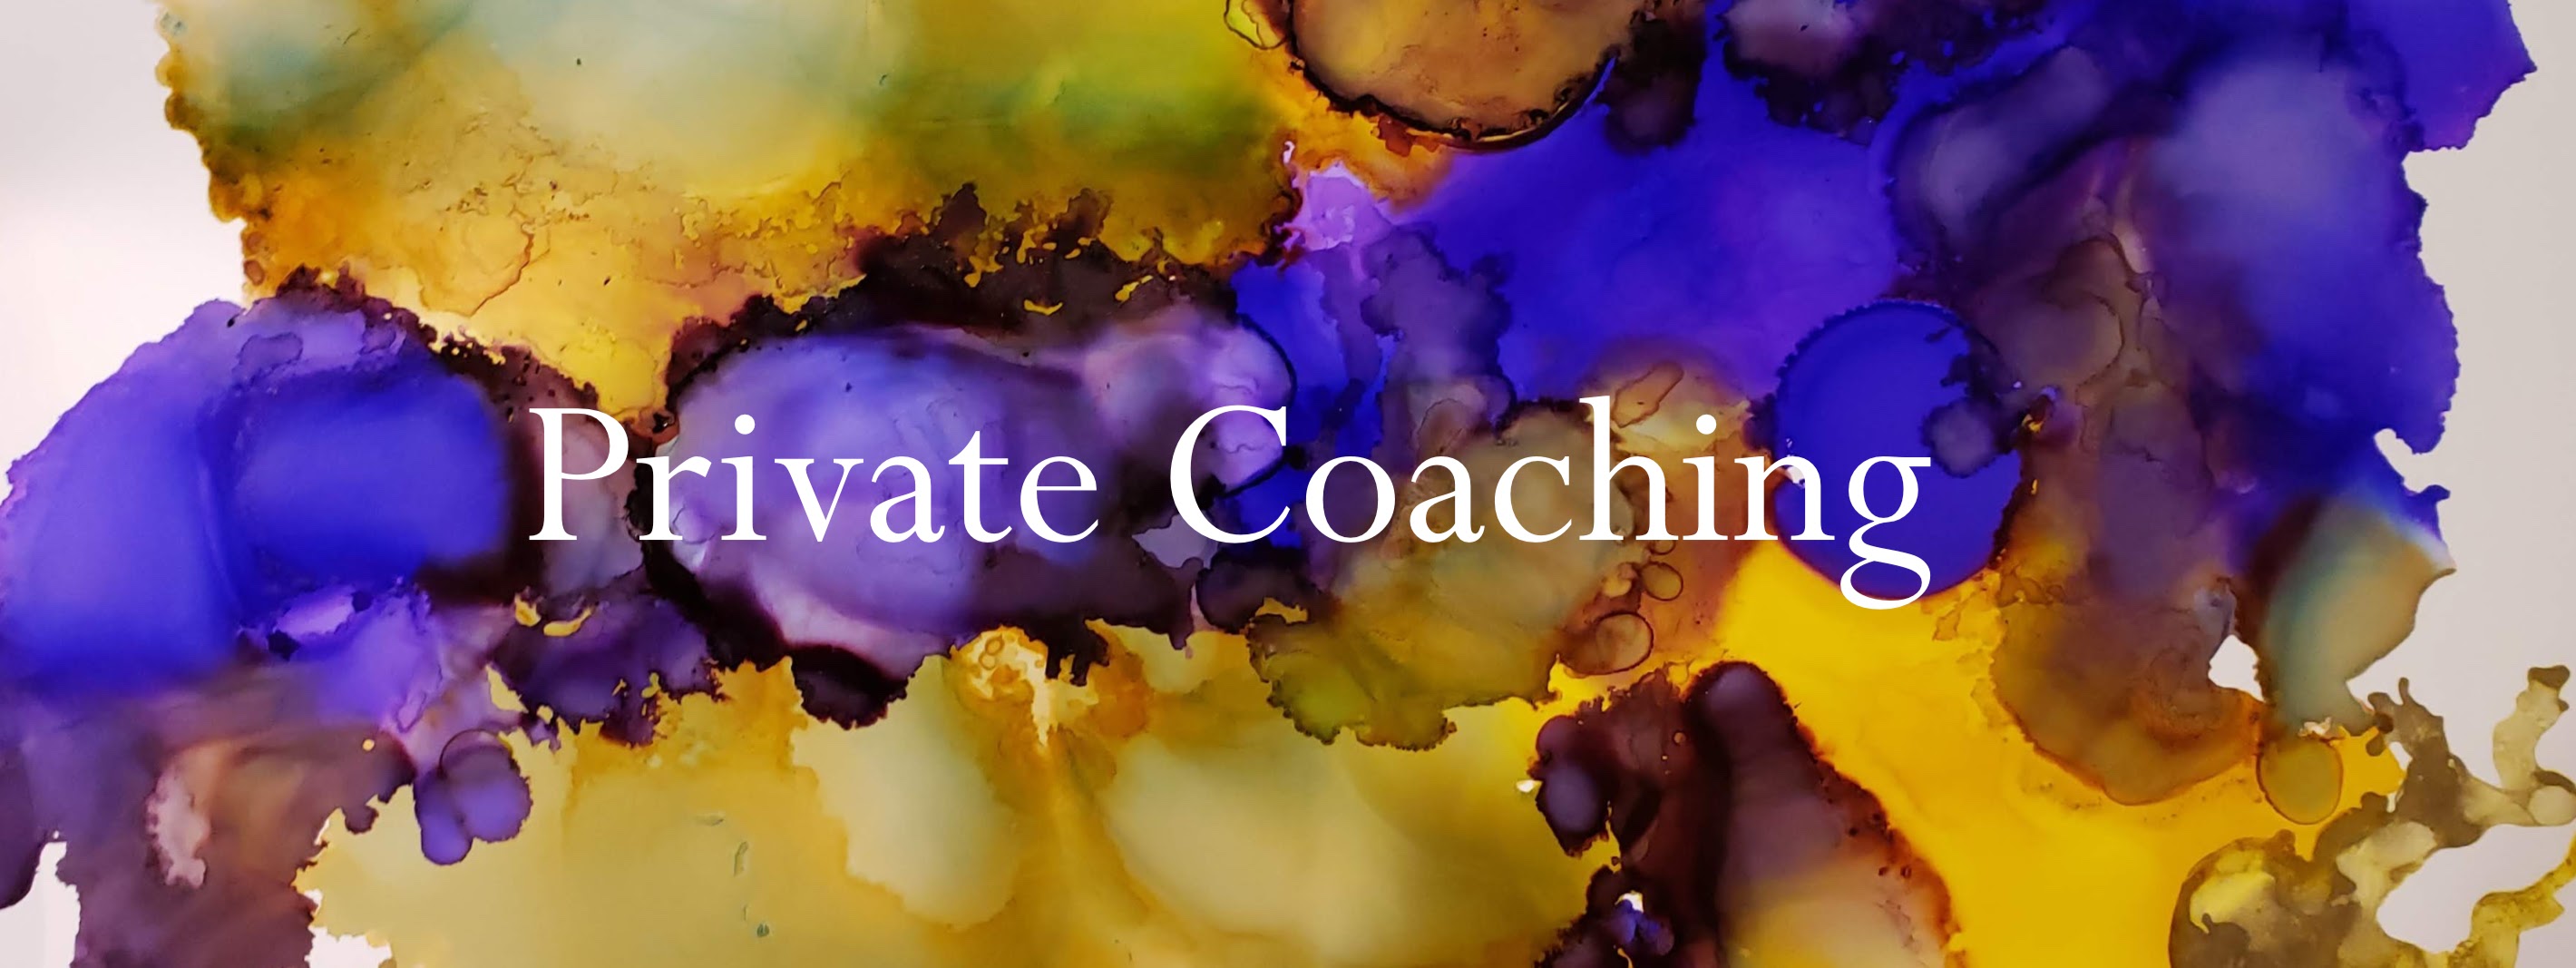 Private Coaching Sessions with Self Esteem Through Art